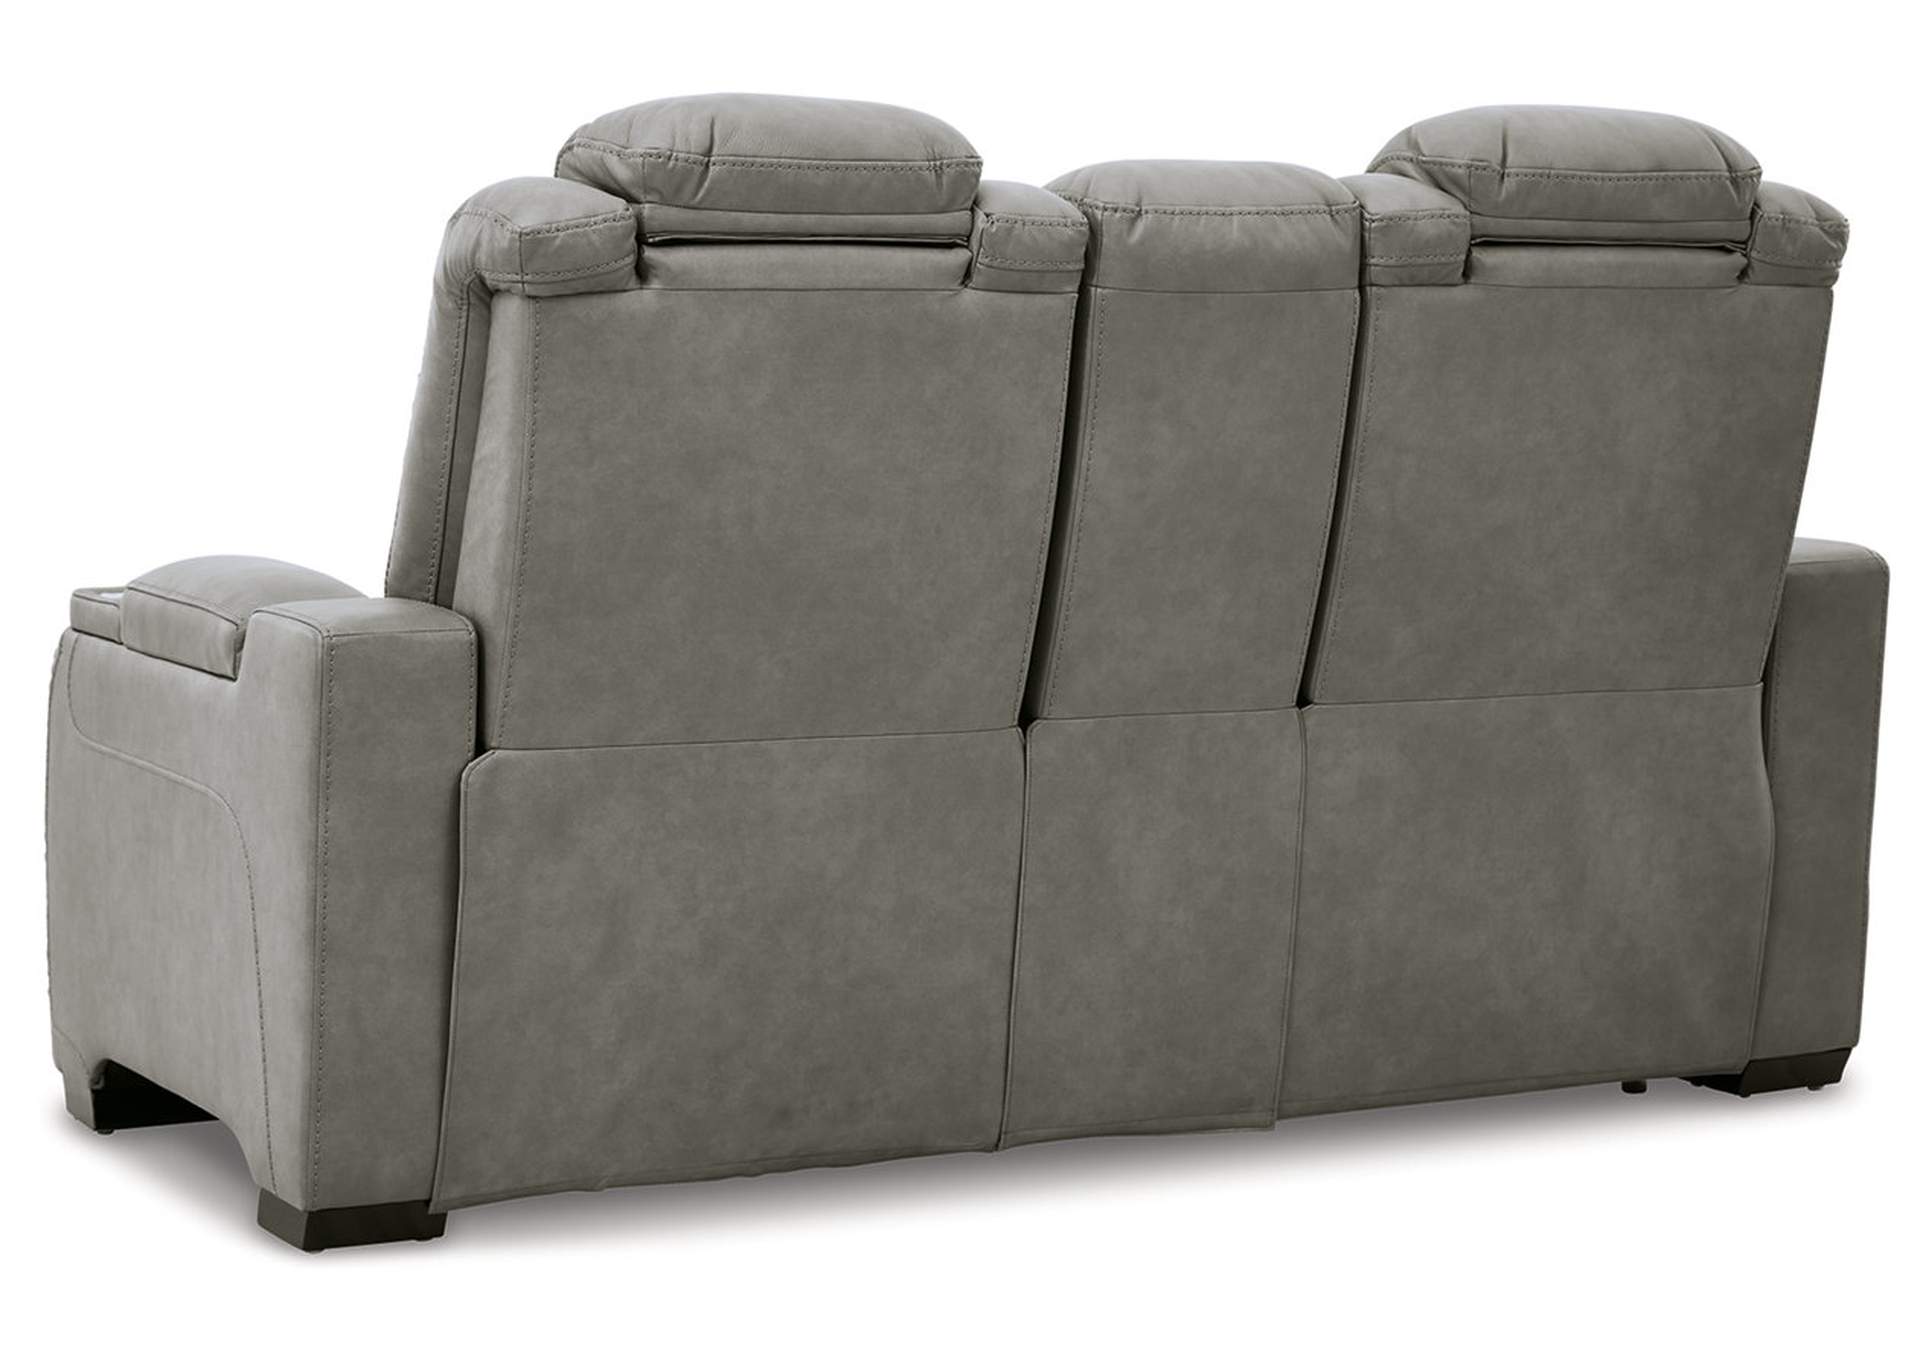 The Man-Den Power Reclining Loveseat with Console,Signature Design By Ashley